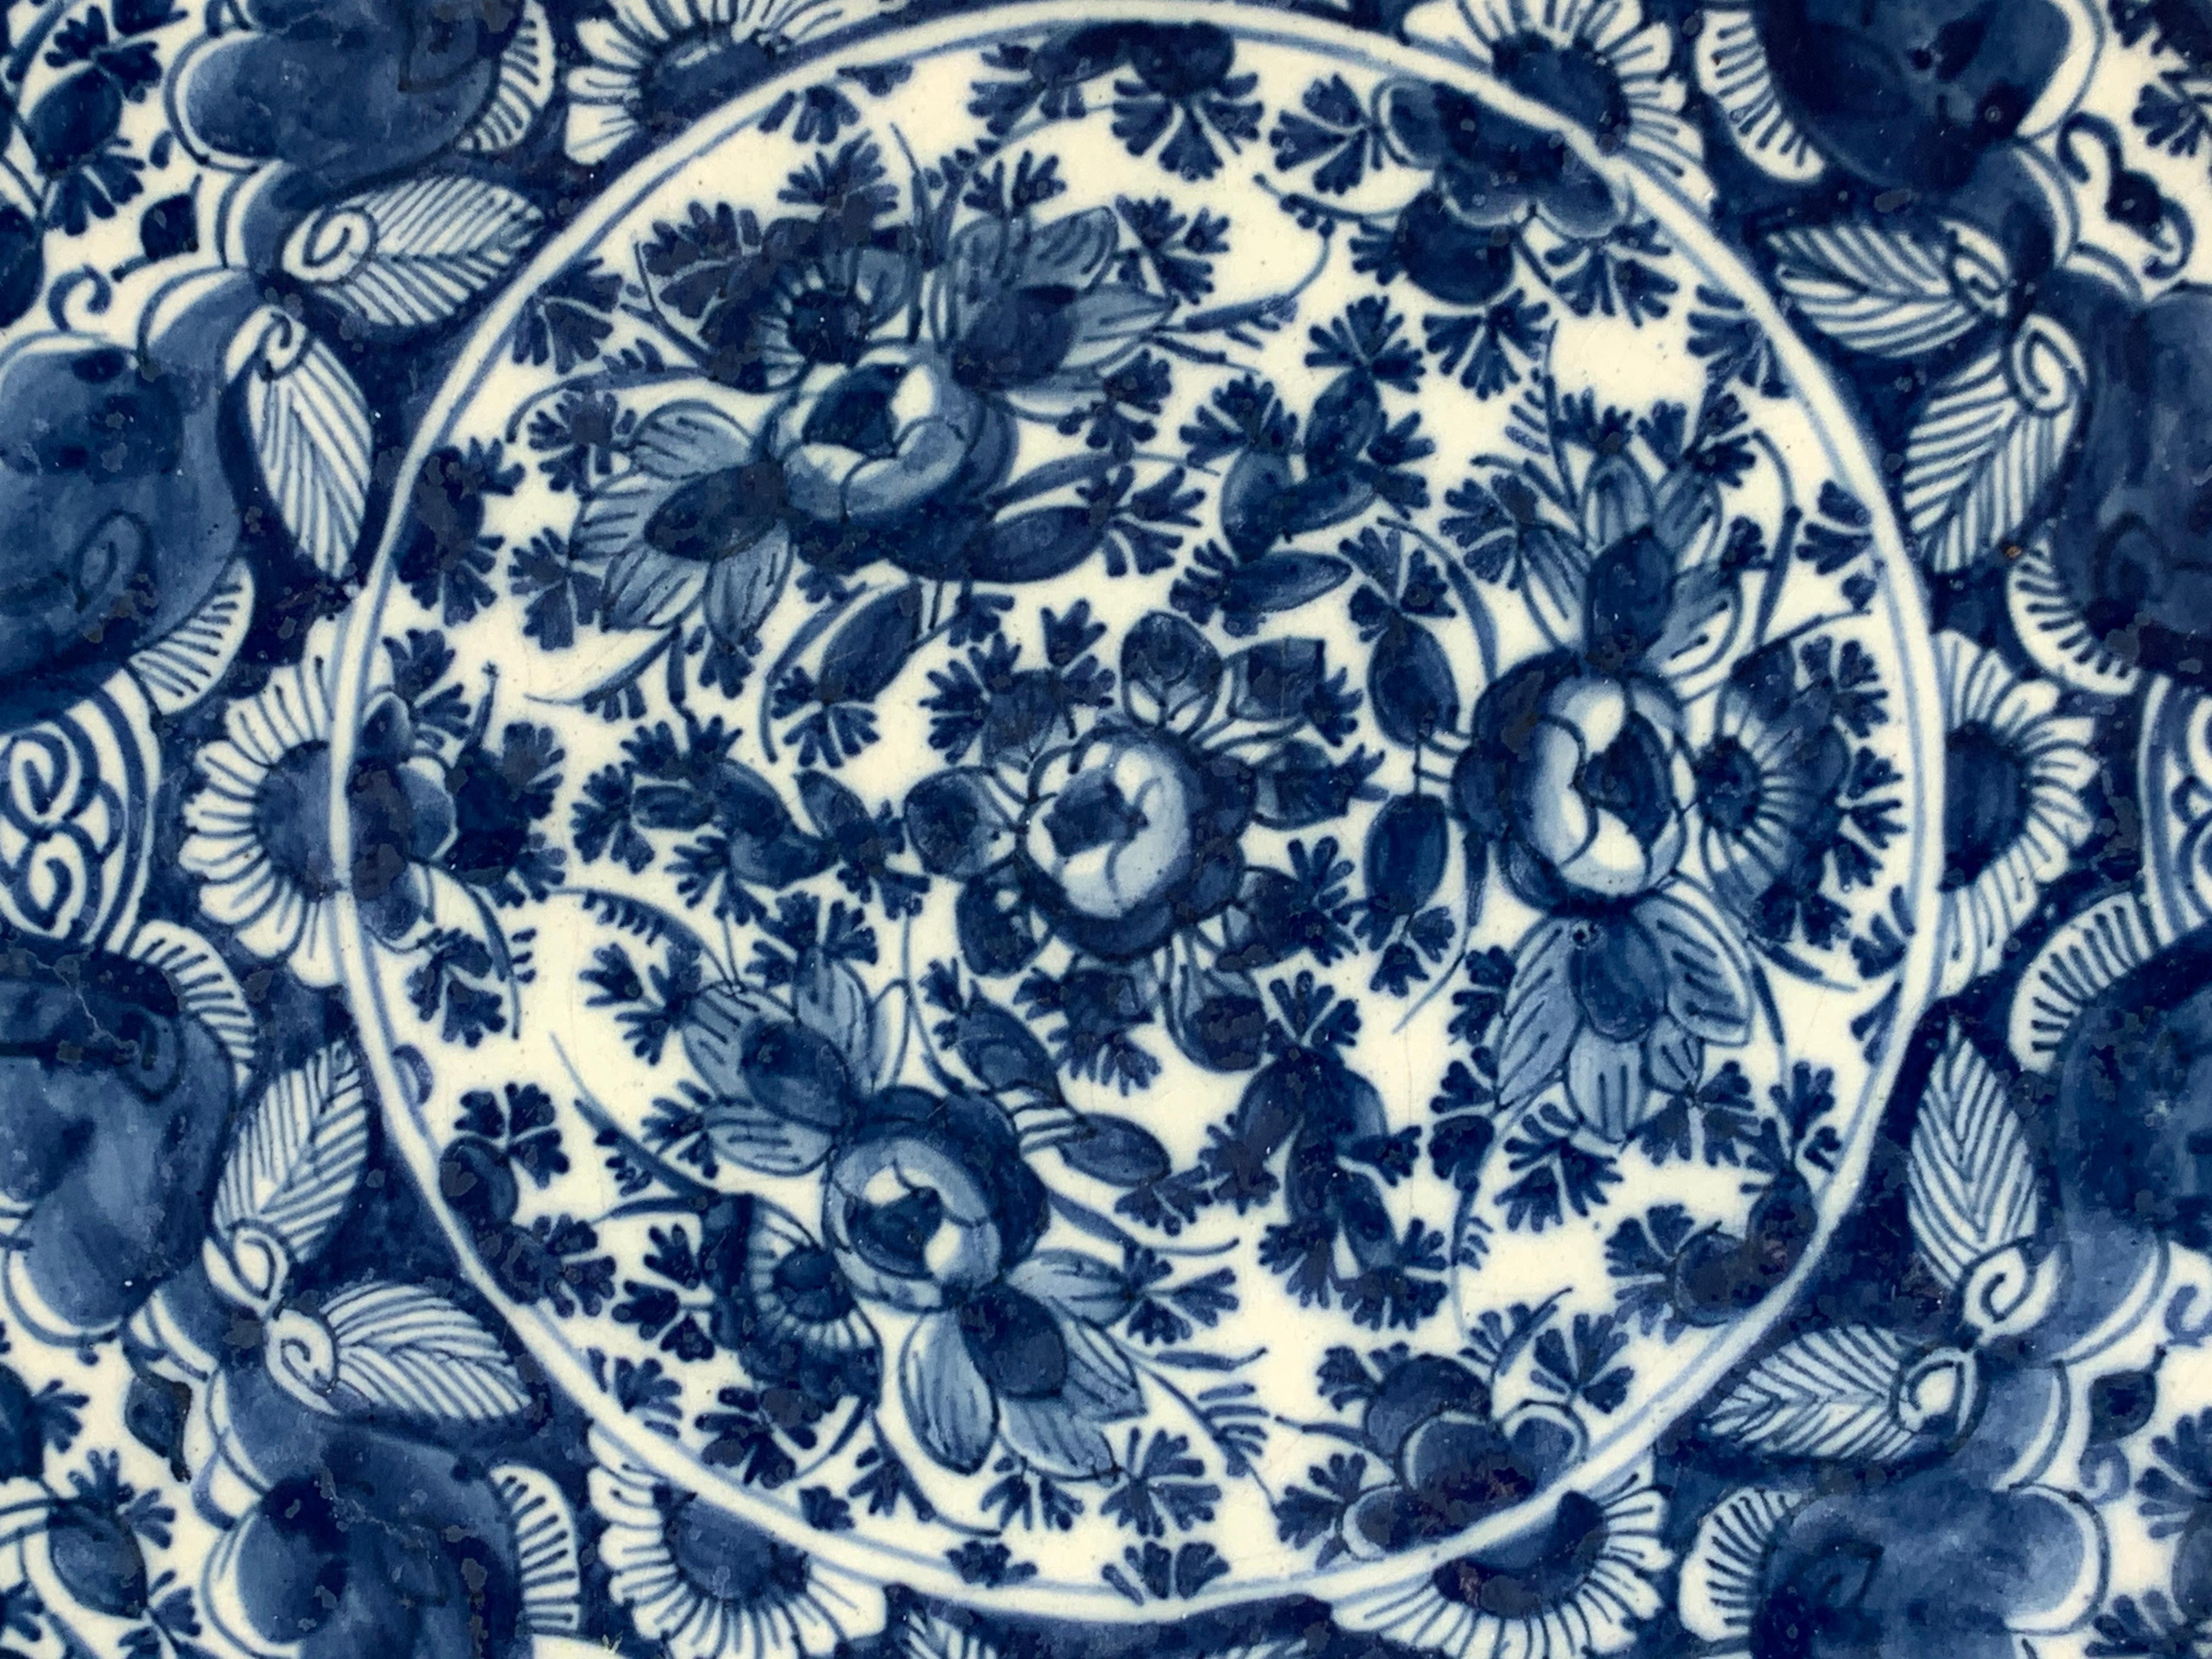 The entire surface of this blue and white Dutch Delft charger is covered in deep beautiful cobalt blue coloring. 
The center of the charger is filled with lovely hand-painted peonies, while the wide border is painted with a net-like pattern of